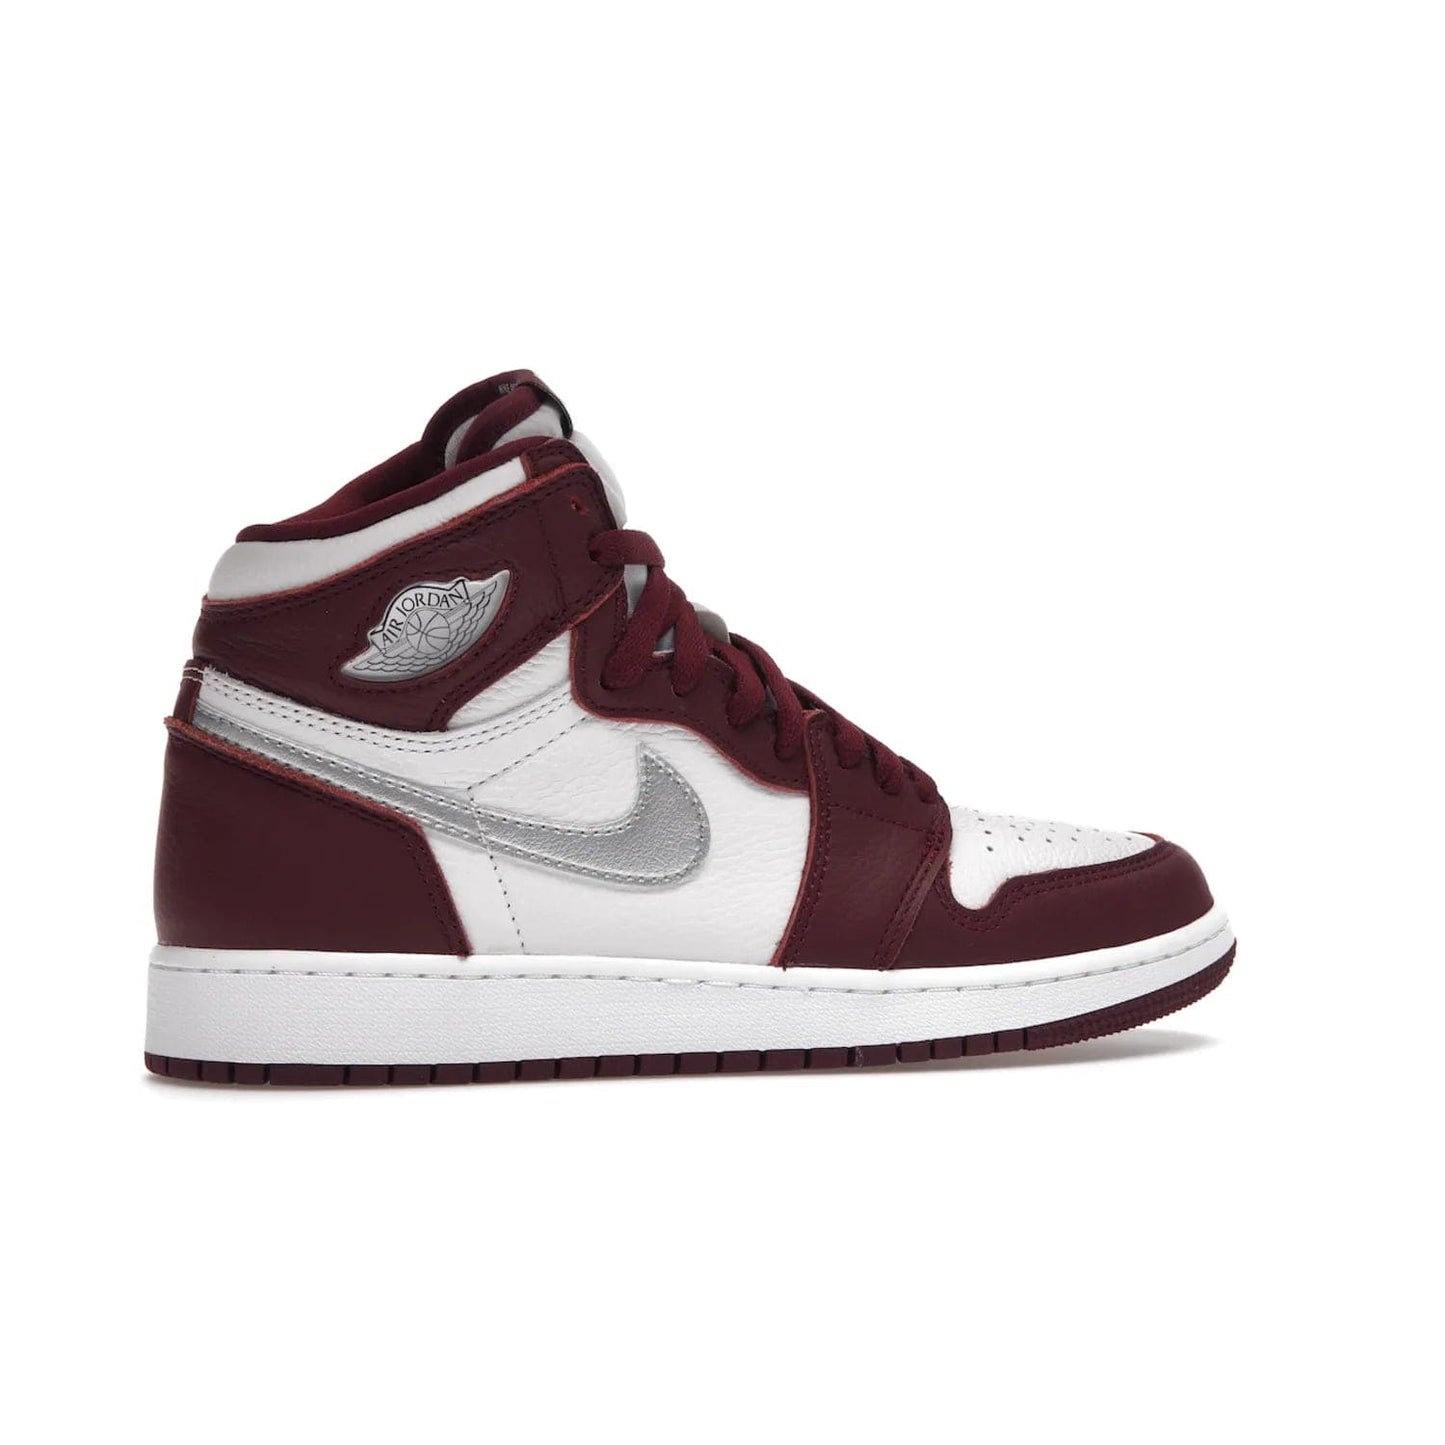 Jordan 1 Retro High OG Bordeaux (GS) - Image 35 - Only at www.BallersClubKickz.com - #
Introducing the Air Jordan 1 Retro High OG Bordeaux GS – a signature colorway part of the Jordan Brand Fall 2021 lineup. White leather upper & Bordeaux overlays, metallic silver swoosh, jeweled Air Jordan Wings logo & more. Step up your style game with this sleek fall season silhouette.